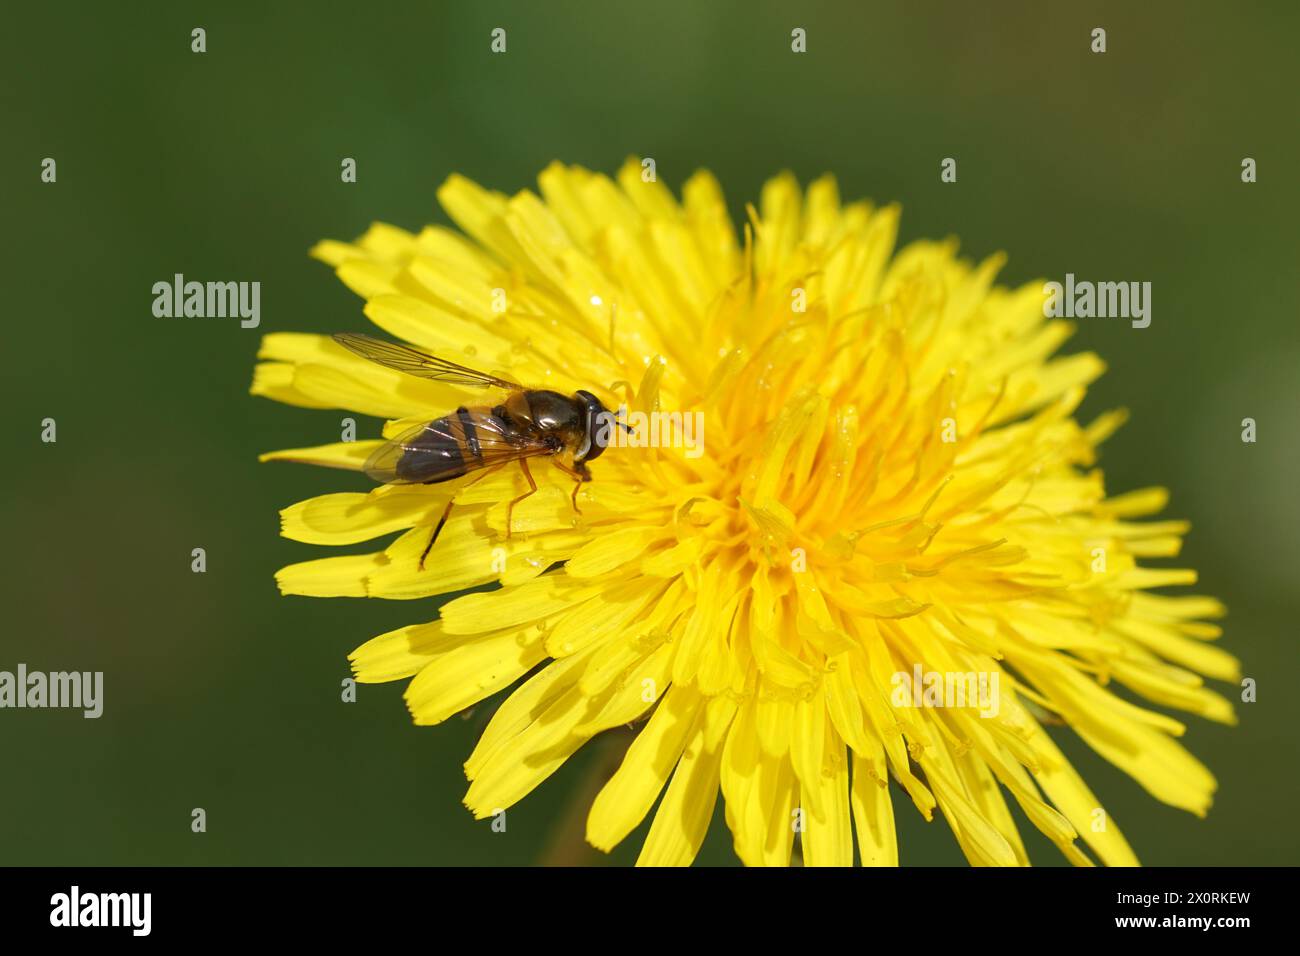 loseup female hoverfly Epistrophe eligans, family hoverflies (Syrphidae) on the flower of Taraxacum officinale, the common dandelion family Asteraceae Stock Photo